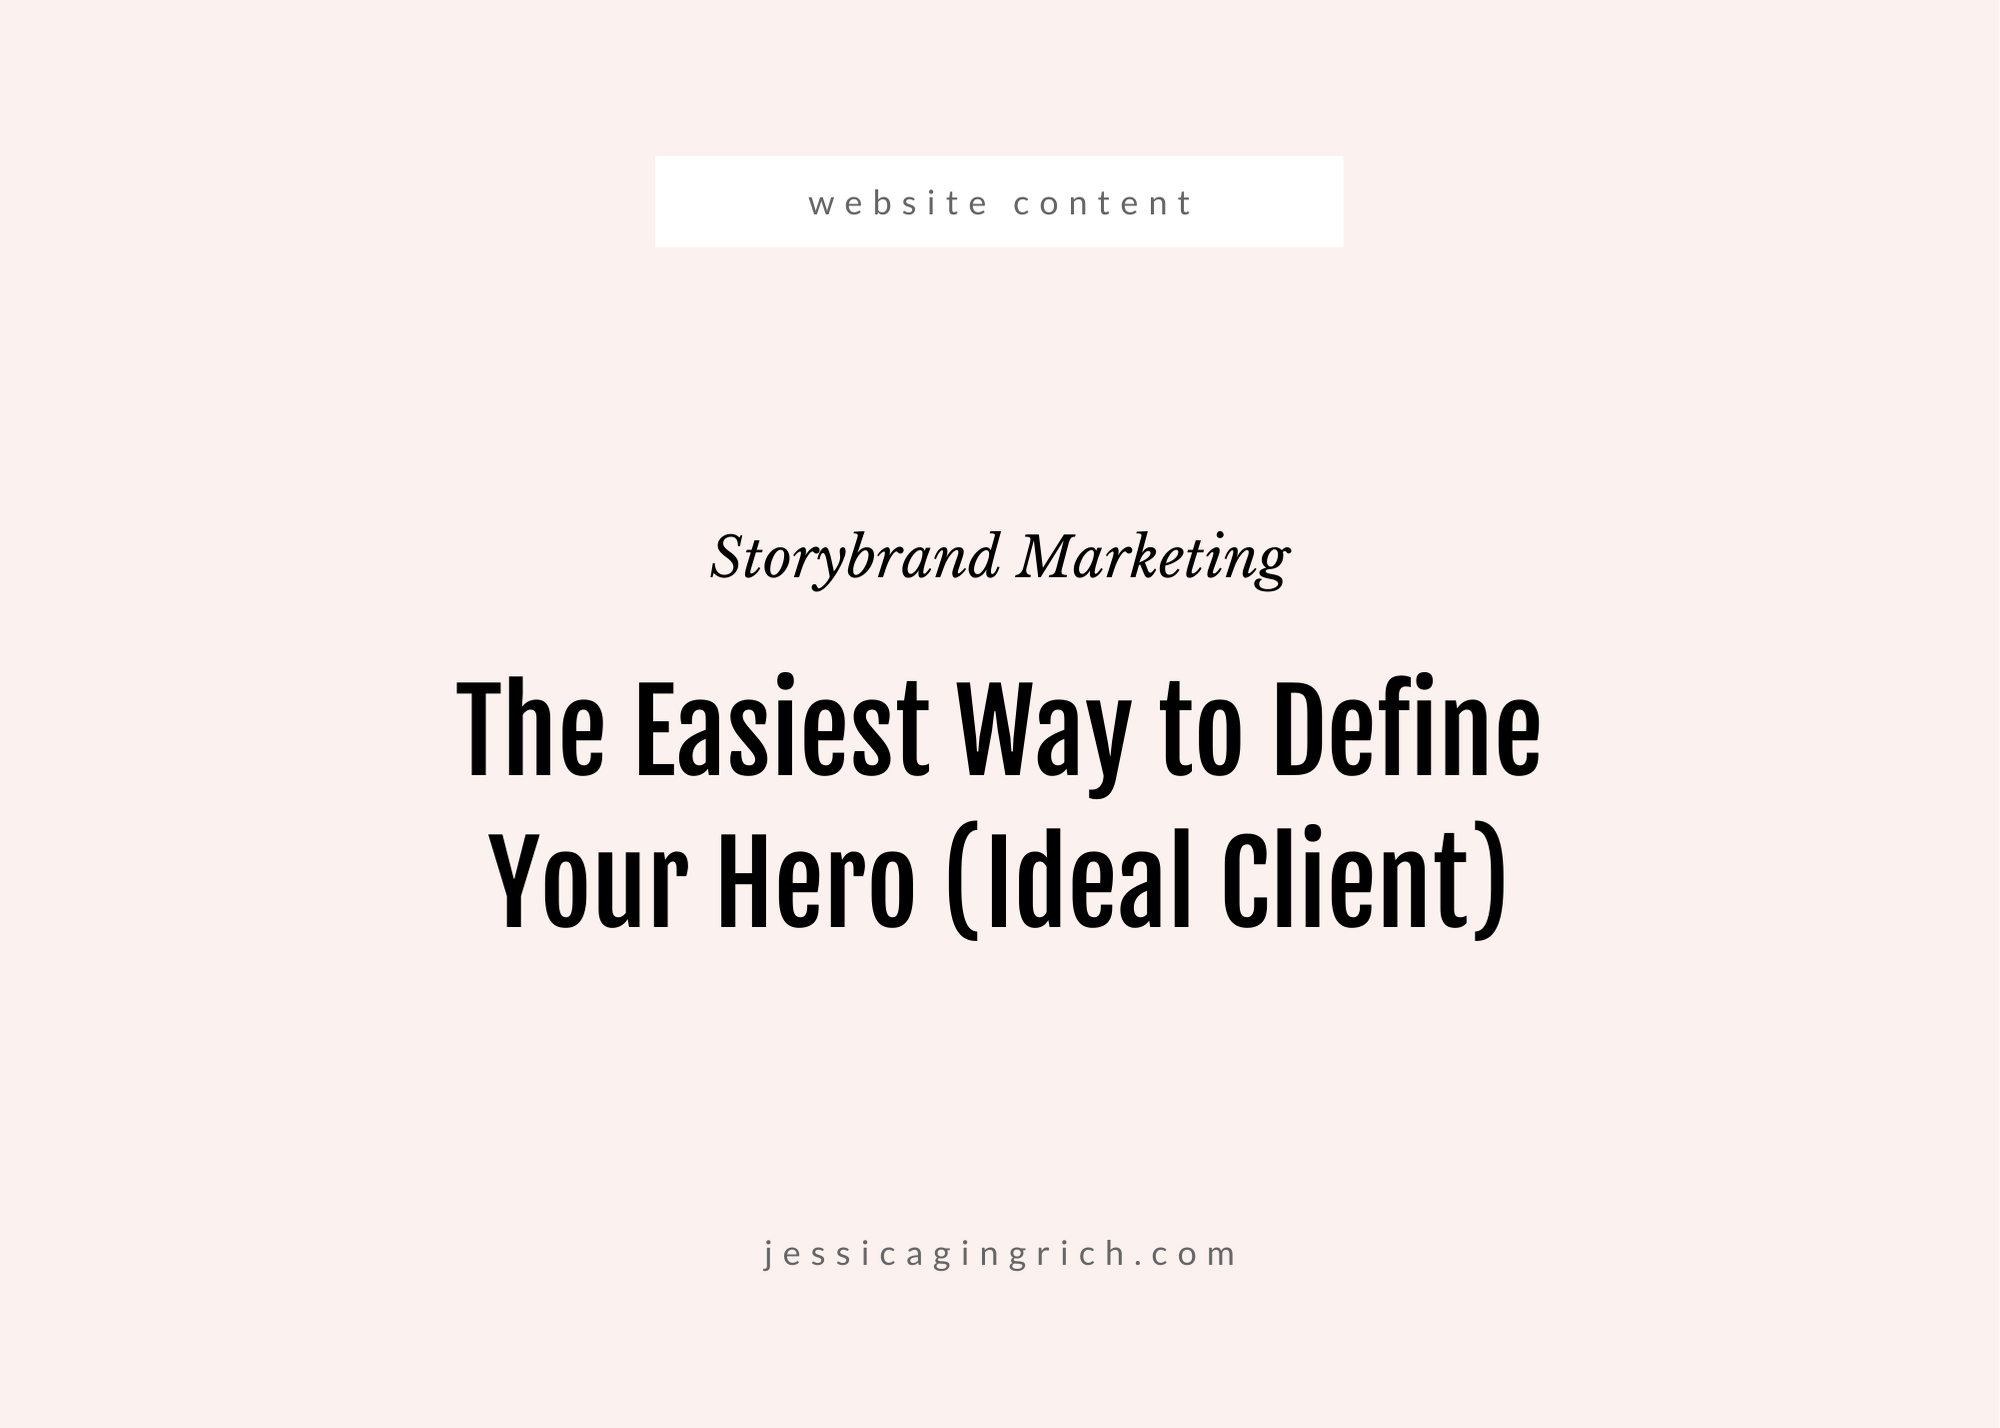 defining your hero - ideal client - jessica gingrich